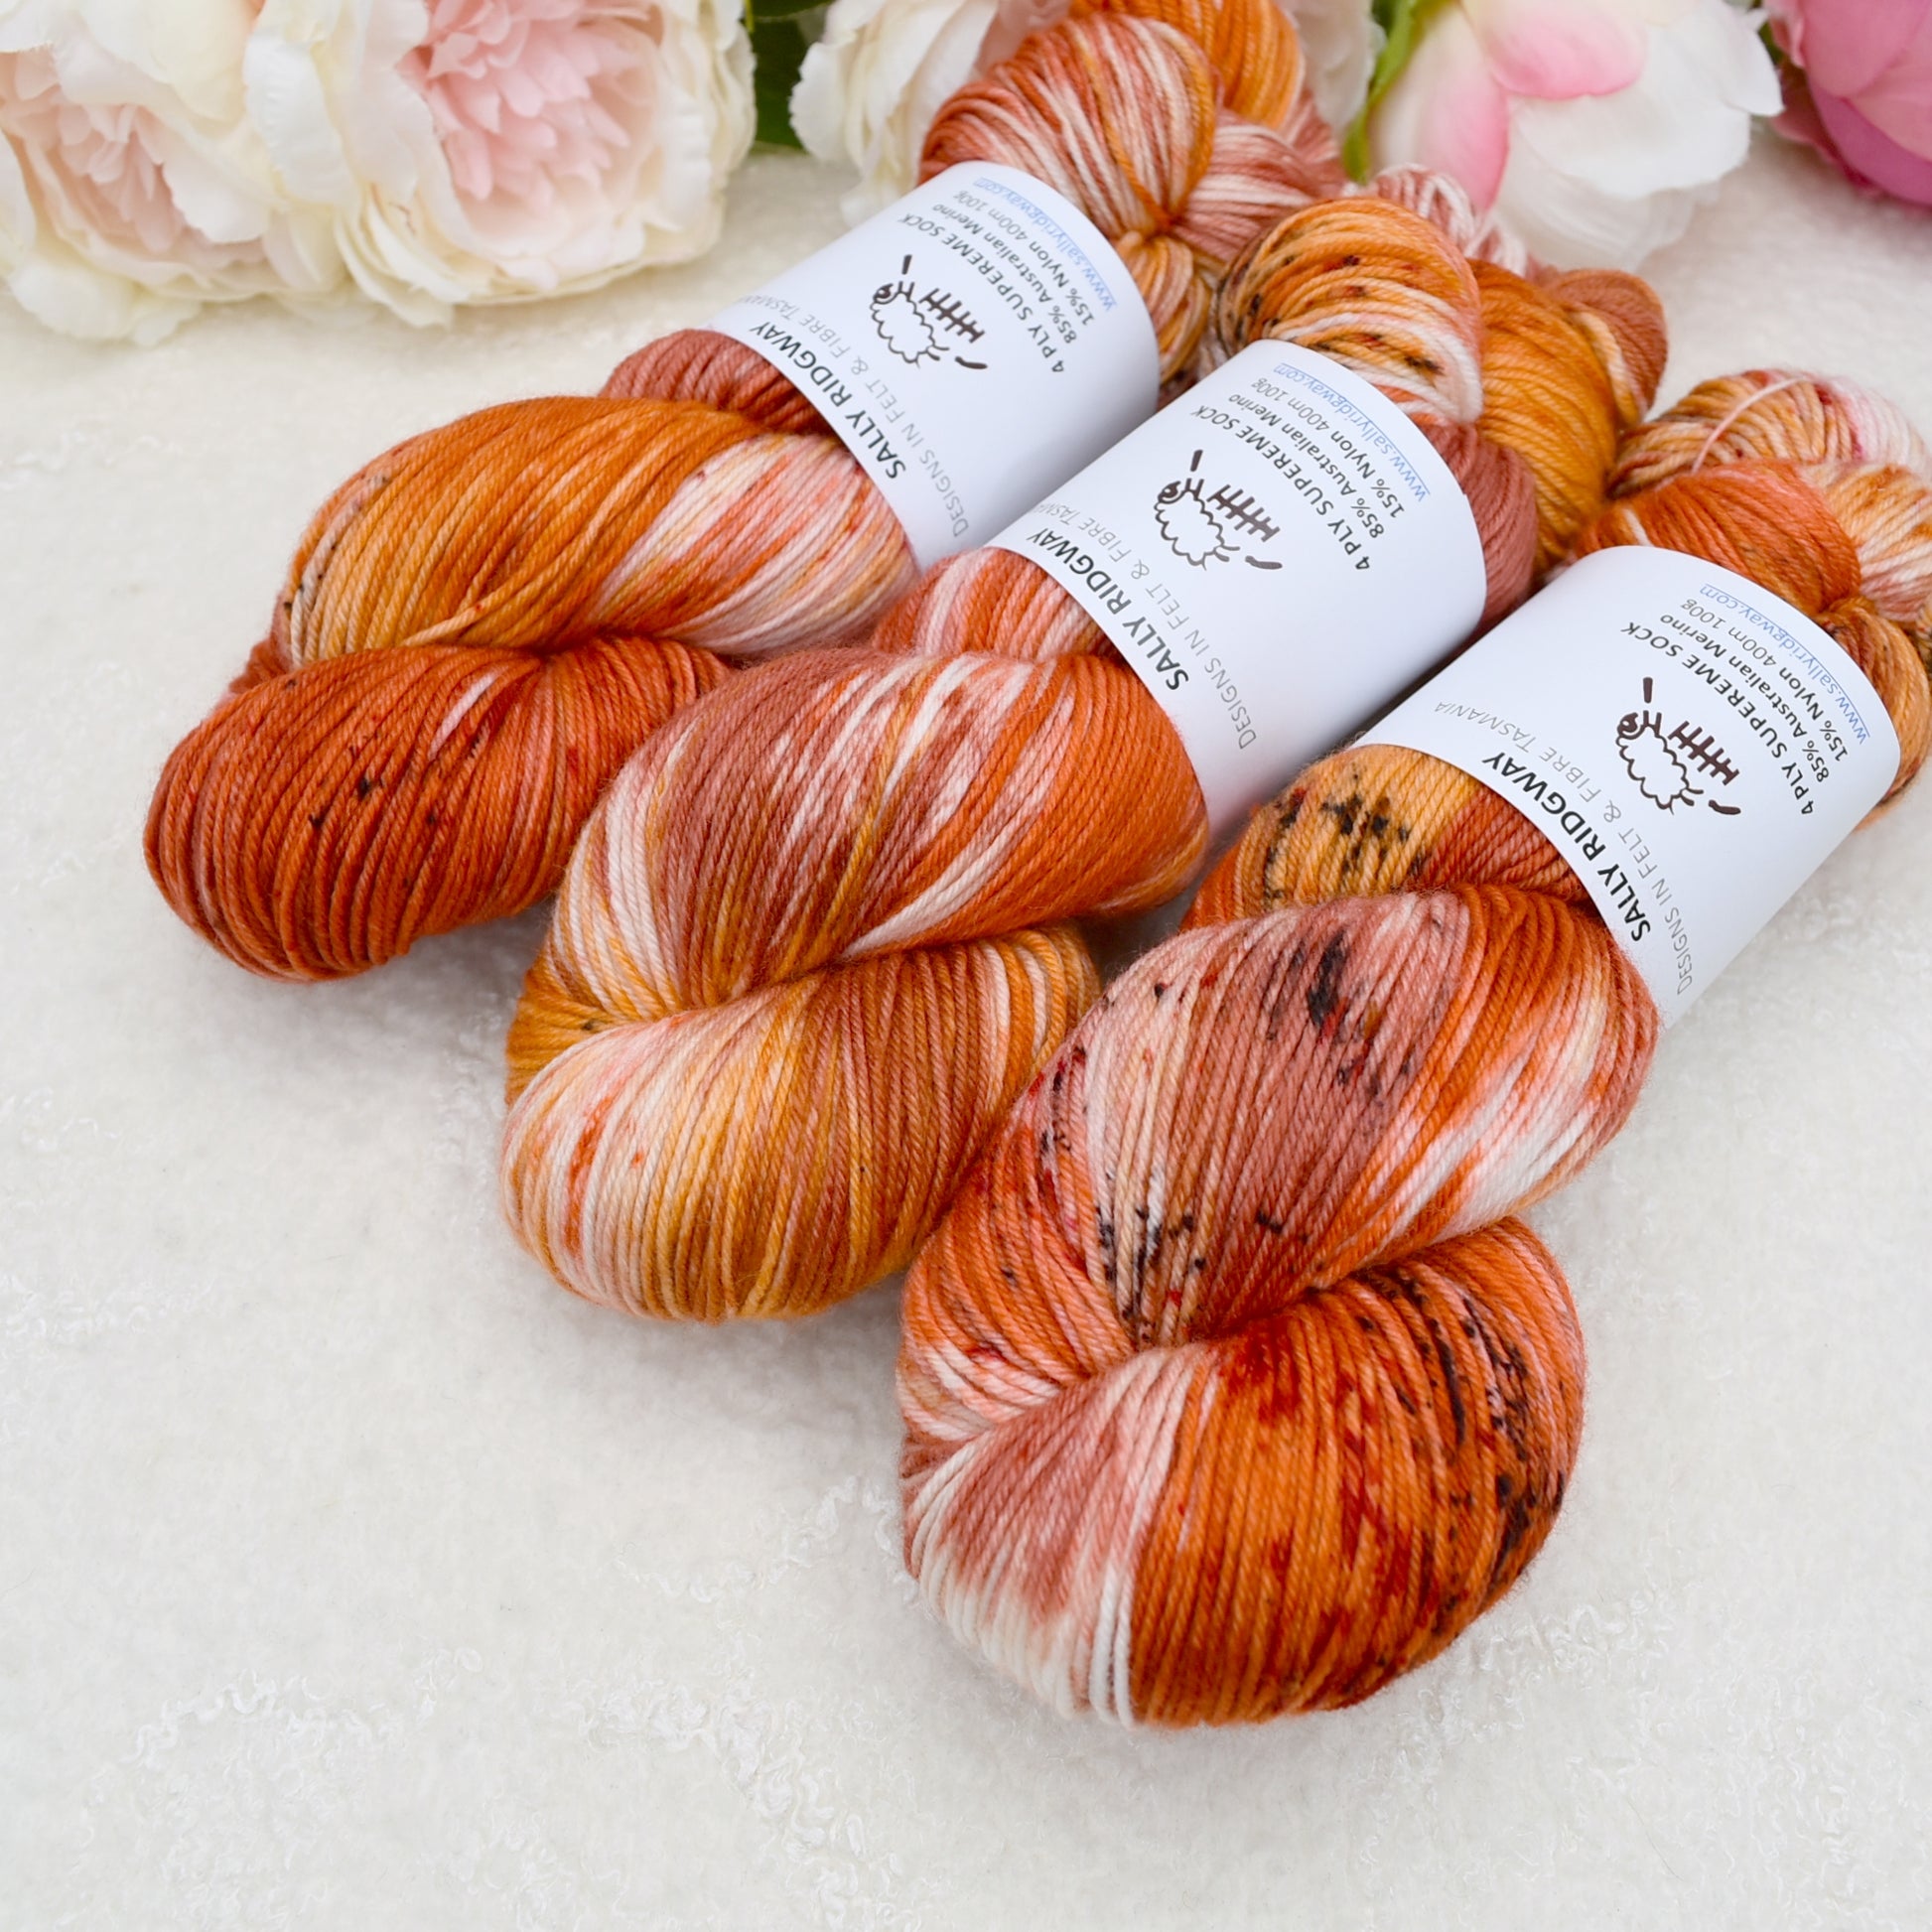 4 ply Supreme Sock Yarn Hand Dyed Red Centre 13312| Sock Yarn | Sally Ridgway | Shop Wool, Felt and Fibre Online